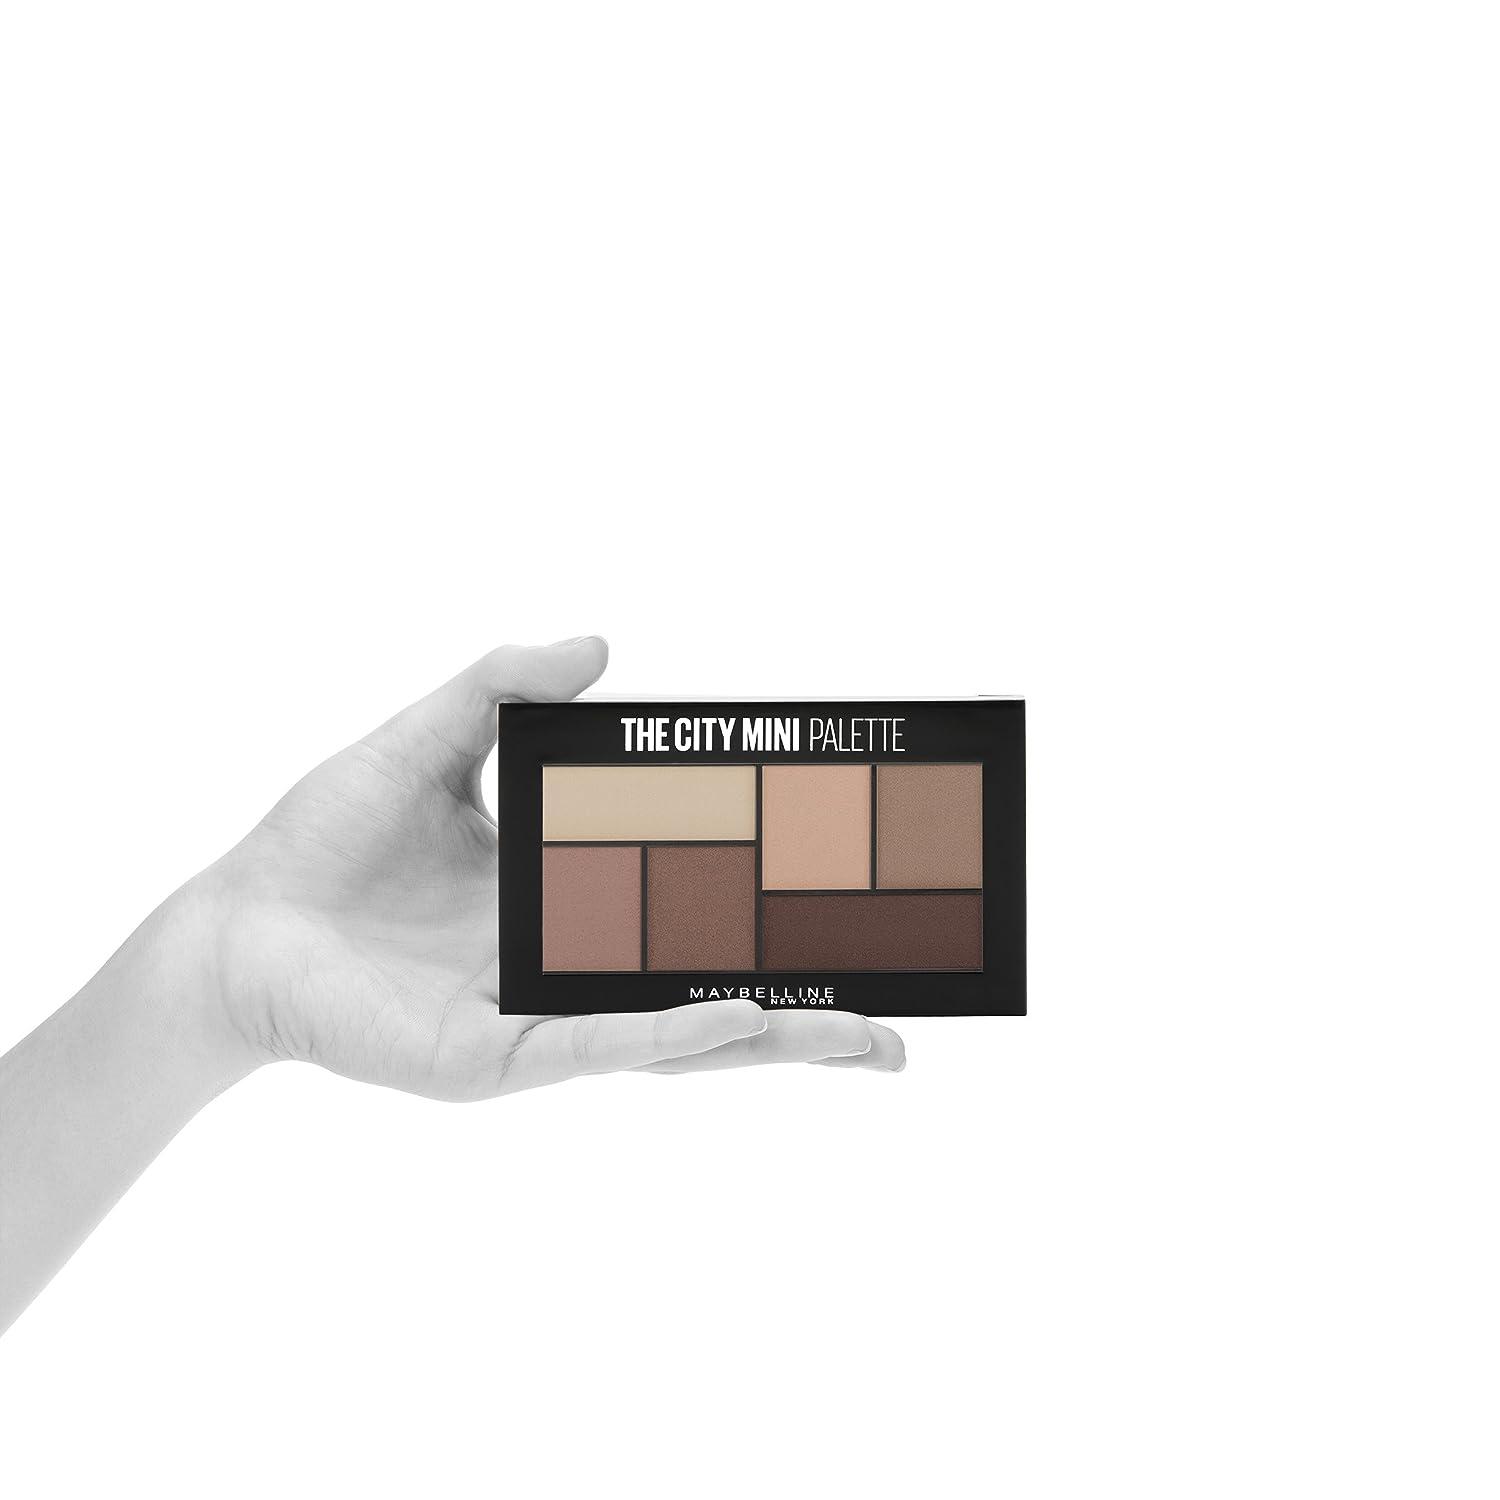 Maybelline New York The City Mini Eyeshadow Palette Makeup Skyscape Dusk  0.14 oz. Skyscape Dusk 0.14 Ounce (Pack of 1)